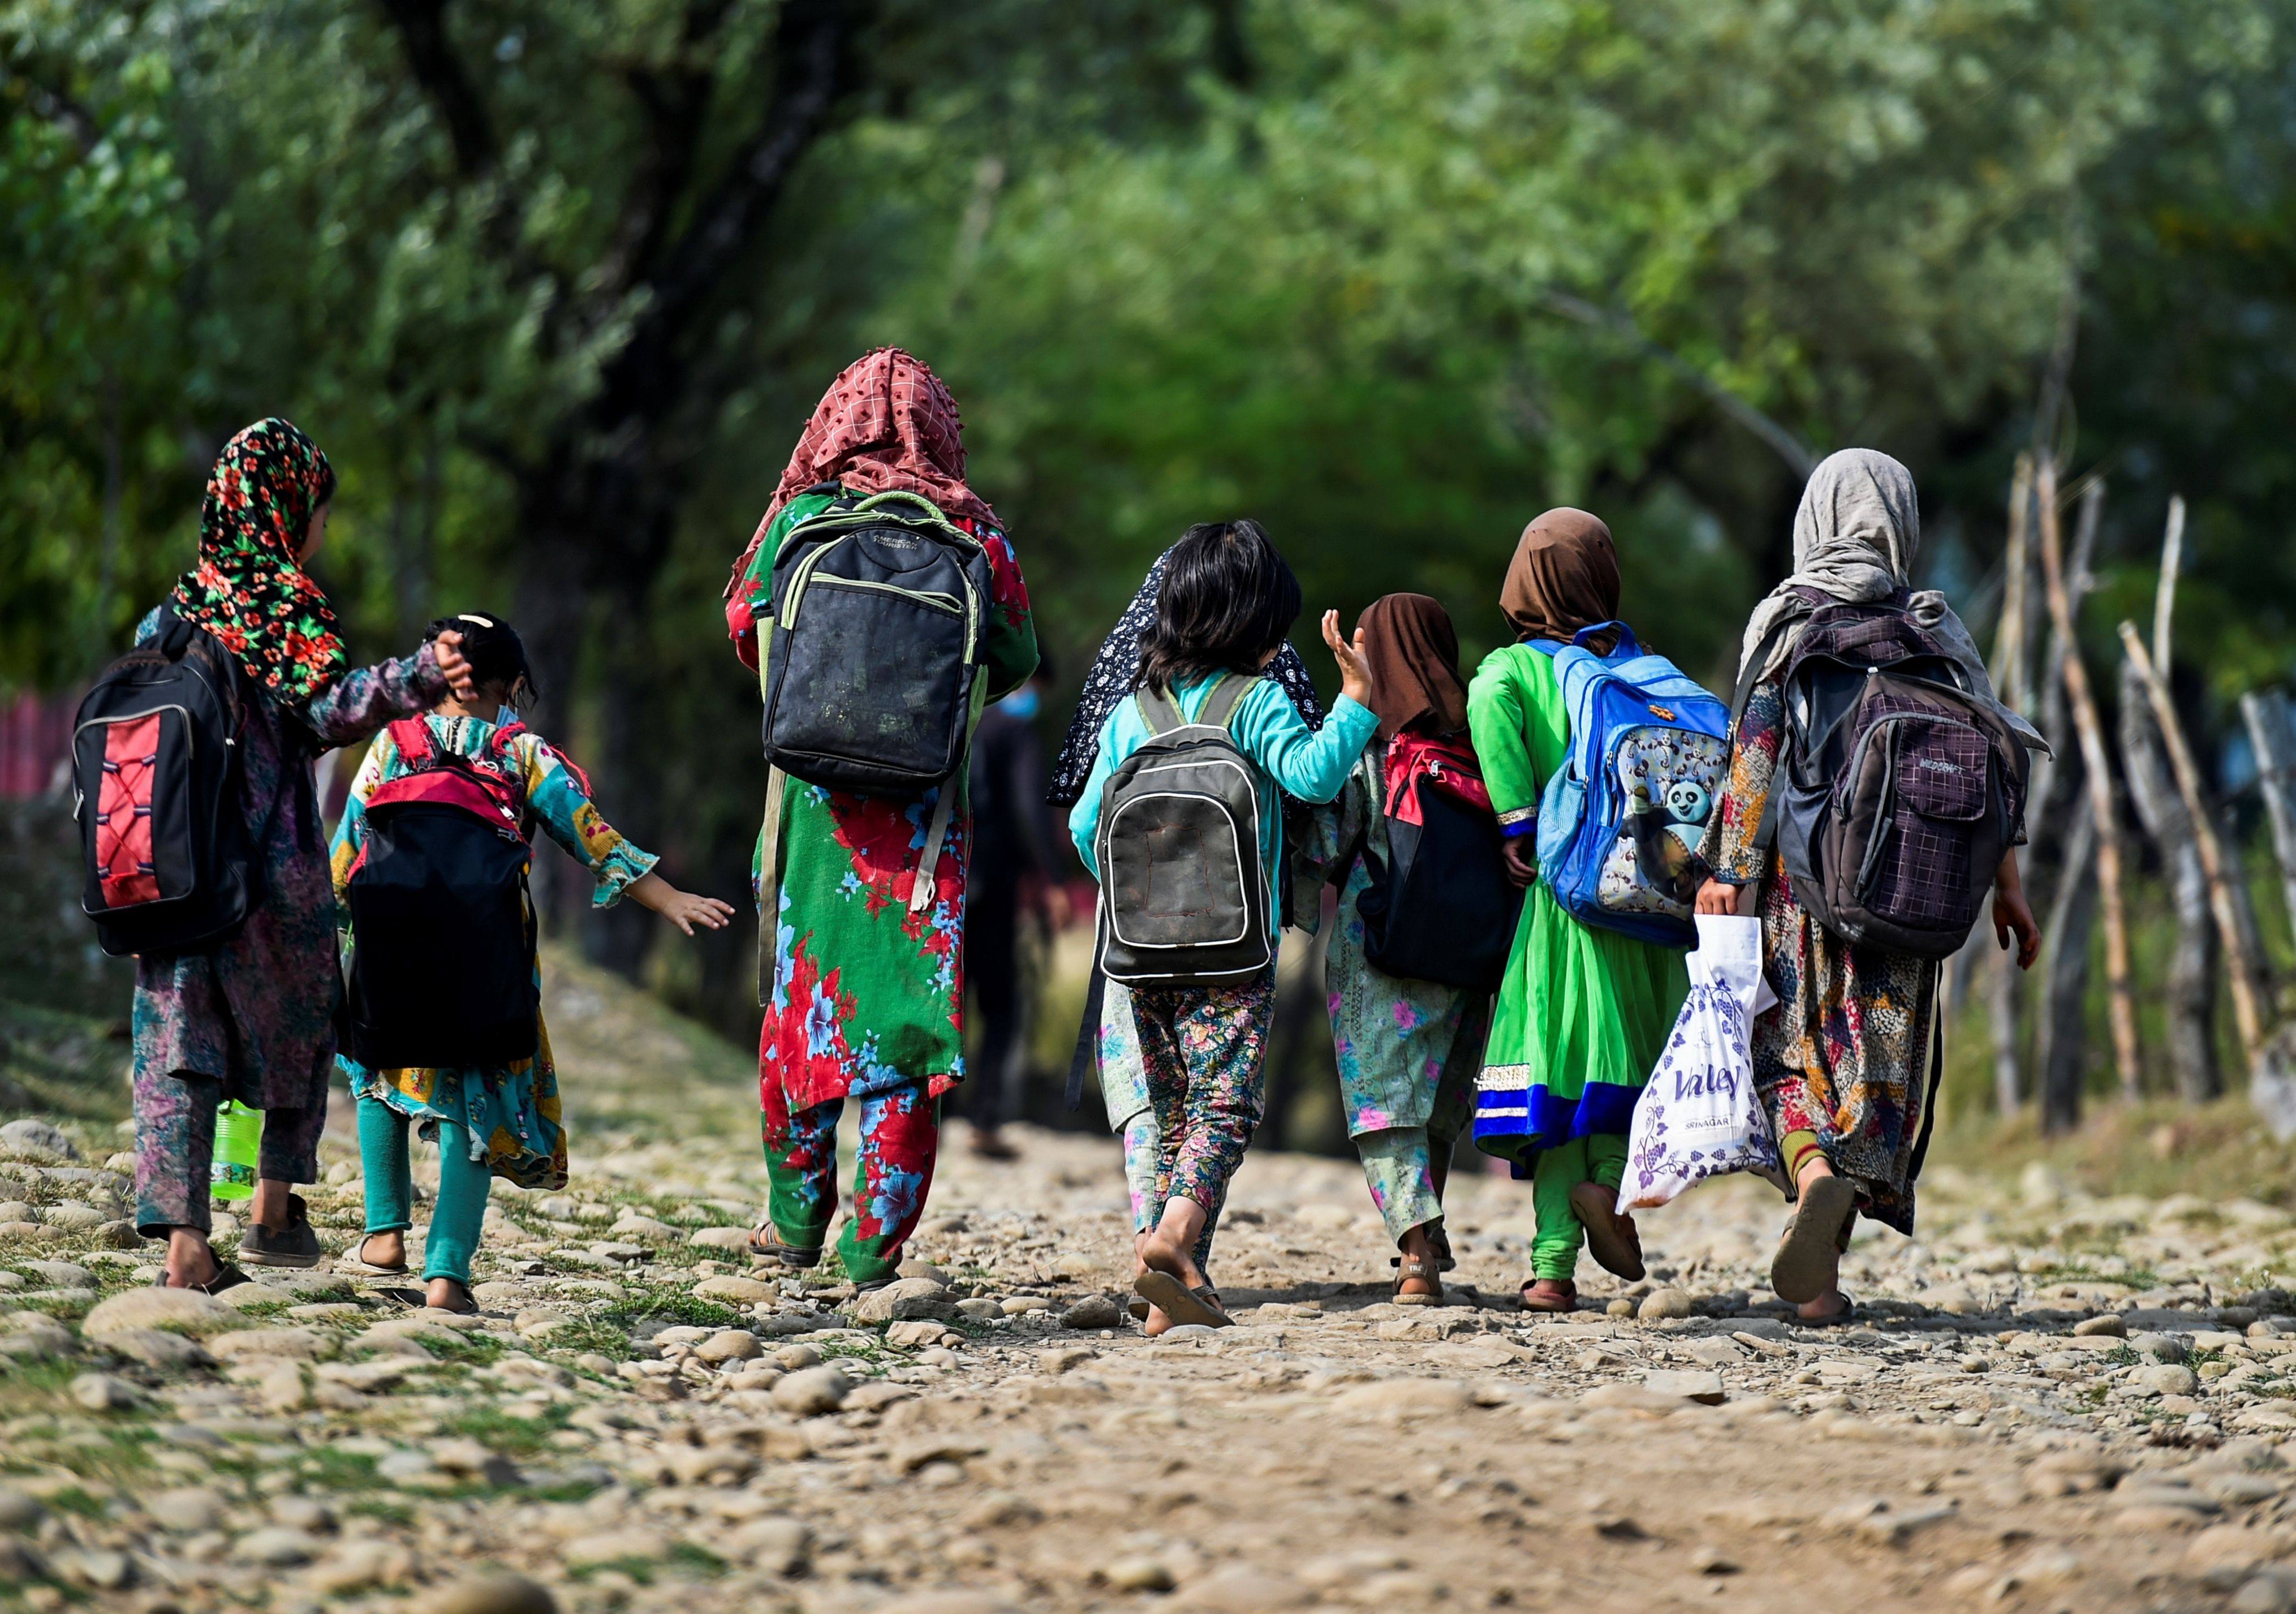 Pupils walk to their open-air school in Doodhpathri, in Indian-administered Kashmir, on July 28, 2020, during the coronavirus pandemic. Photo: AFP